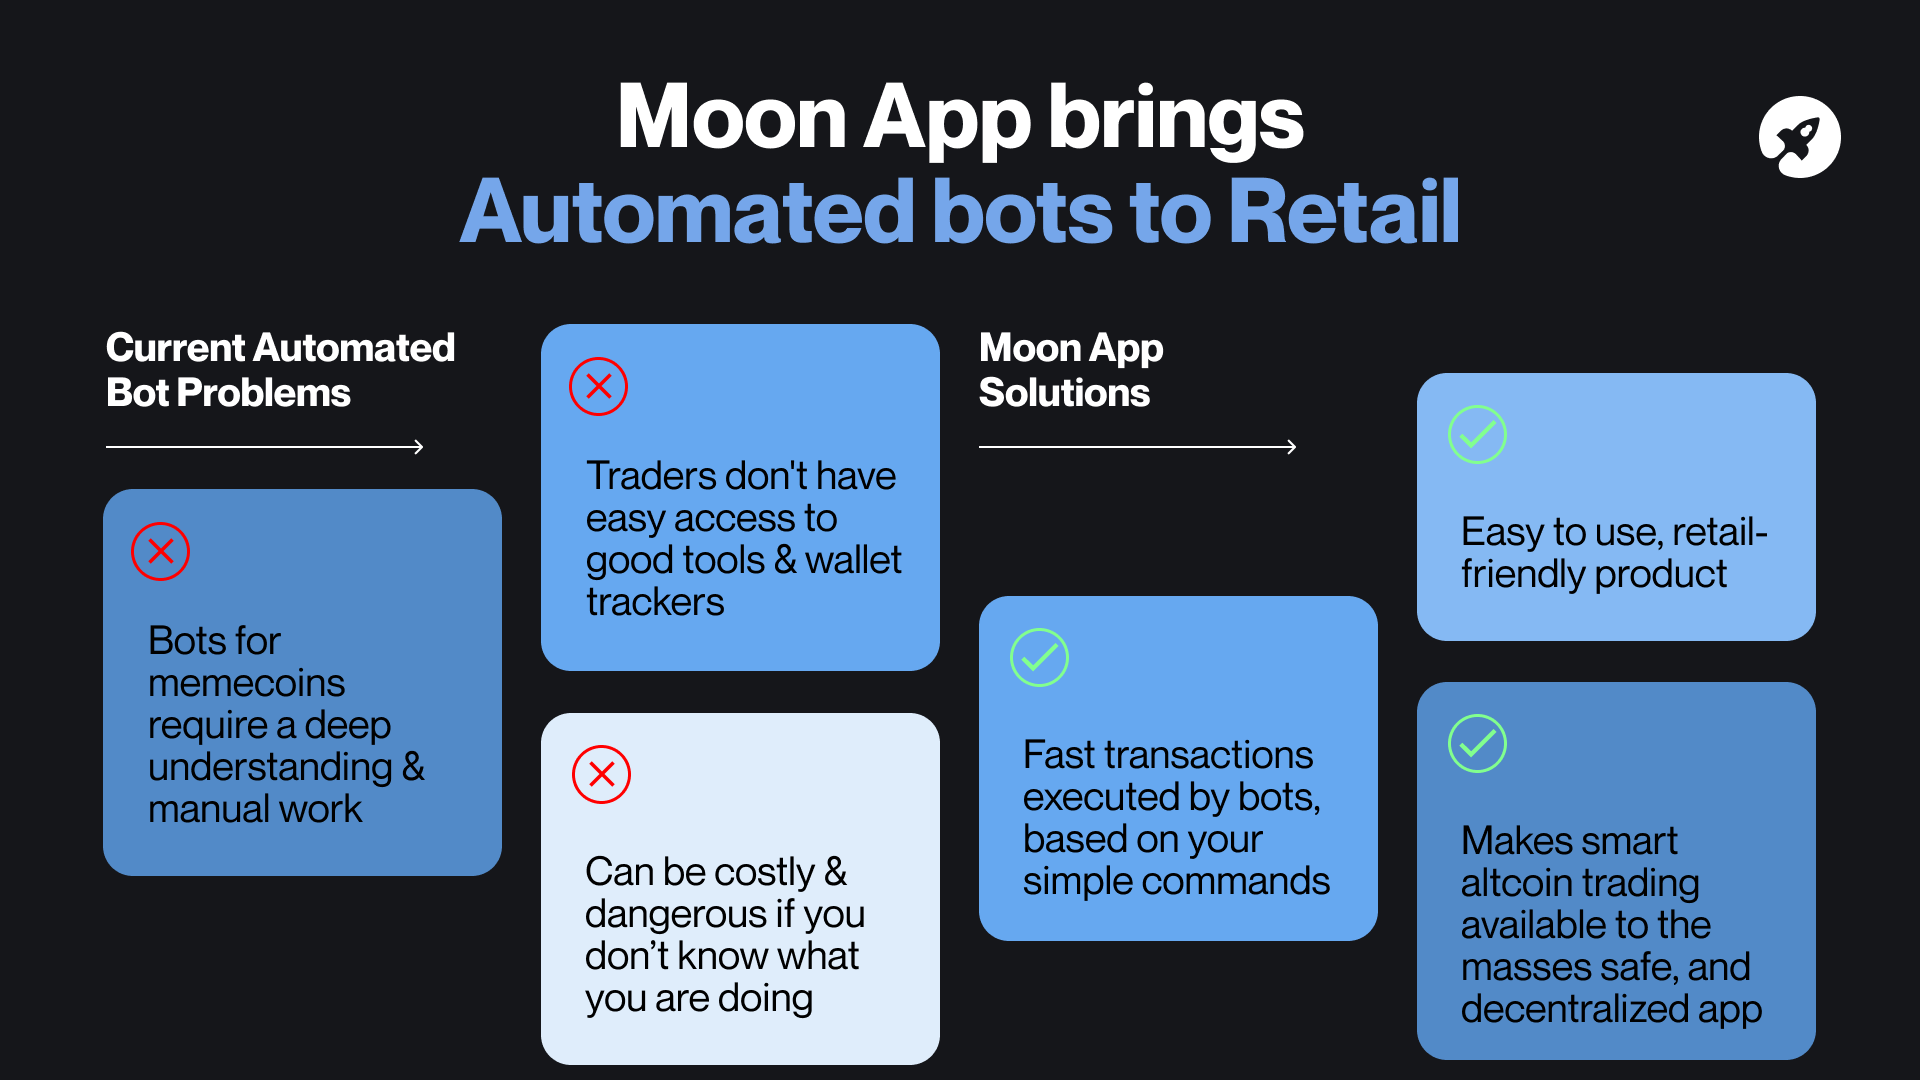 Moon App brings Automated bots to Retail